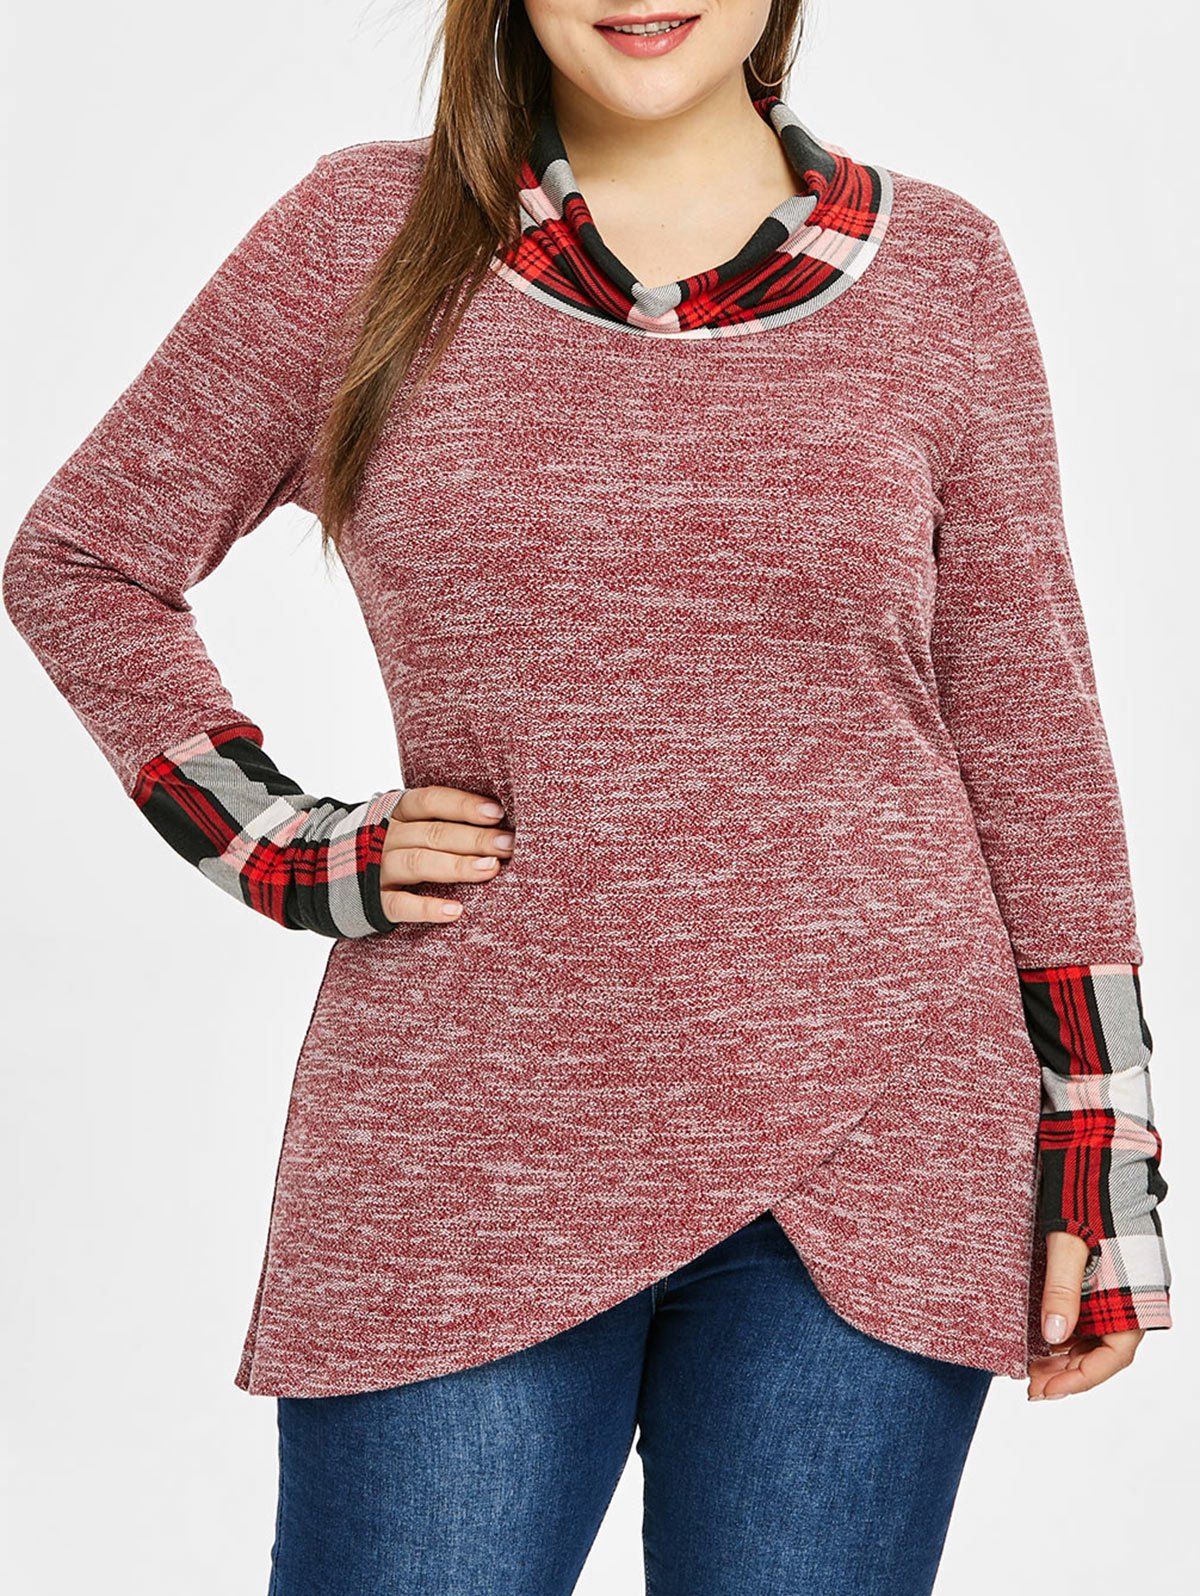 [26% OFF] 2021 Plus Size Cowl Neck Plaid Trim Marled Top In CHERRY RED ...